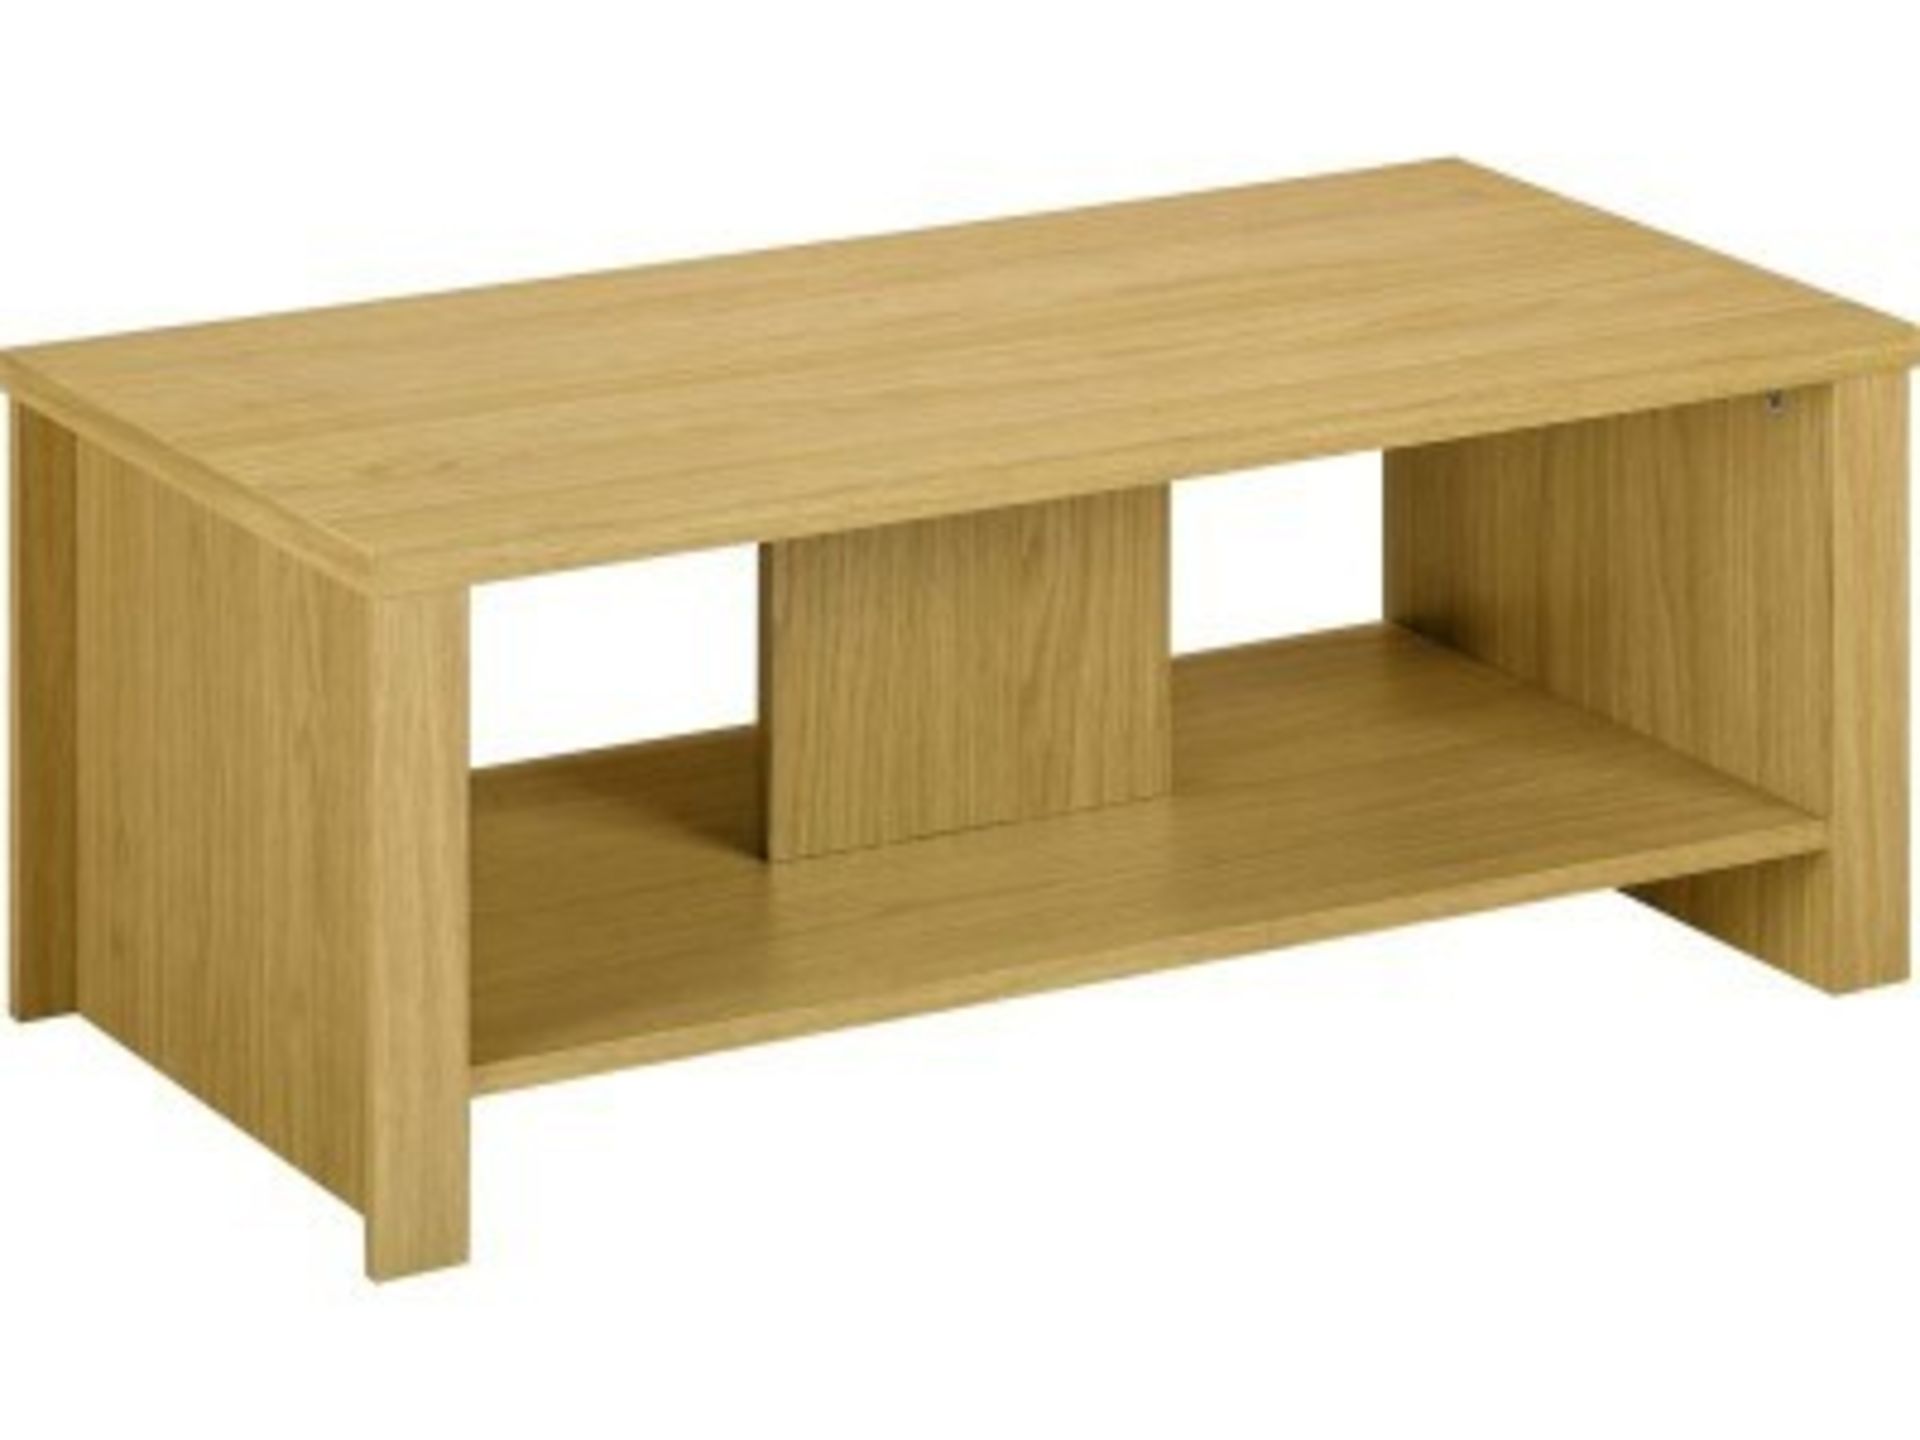 1 BOXED OAK EFFECT OCCASIONAL/COFFEE TABLE / RRP £69.99 (VIEWING HIGHLY RECOMMENDED)